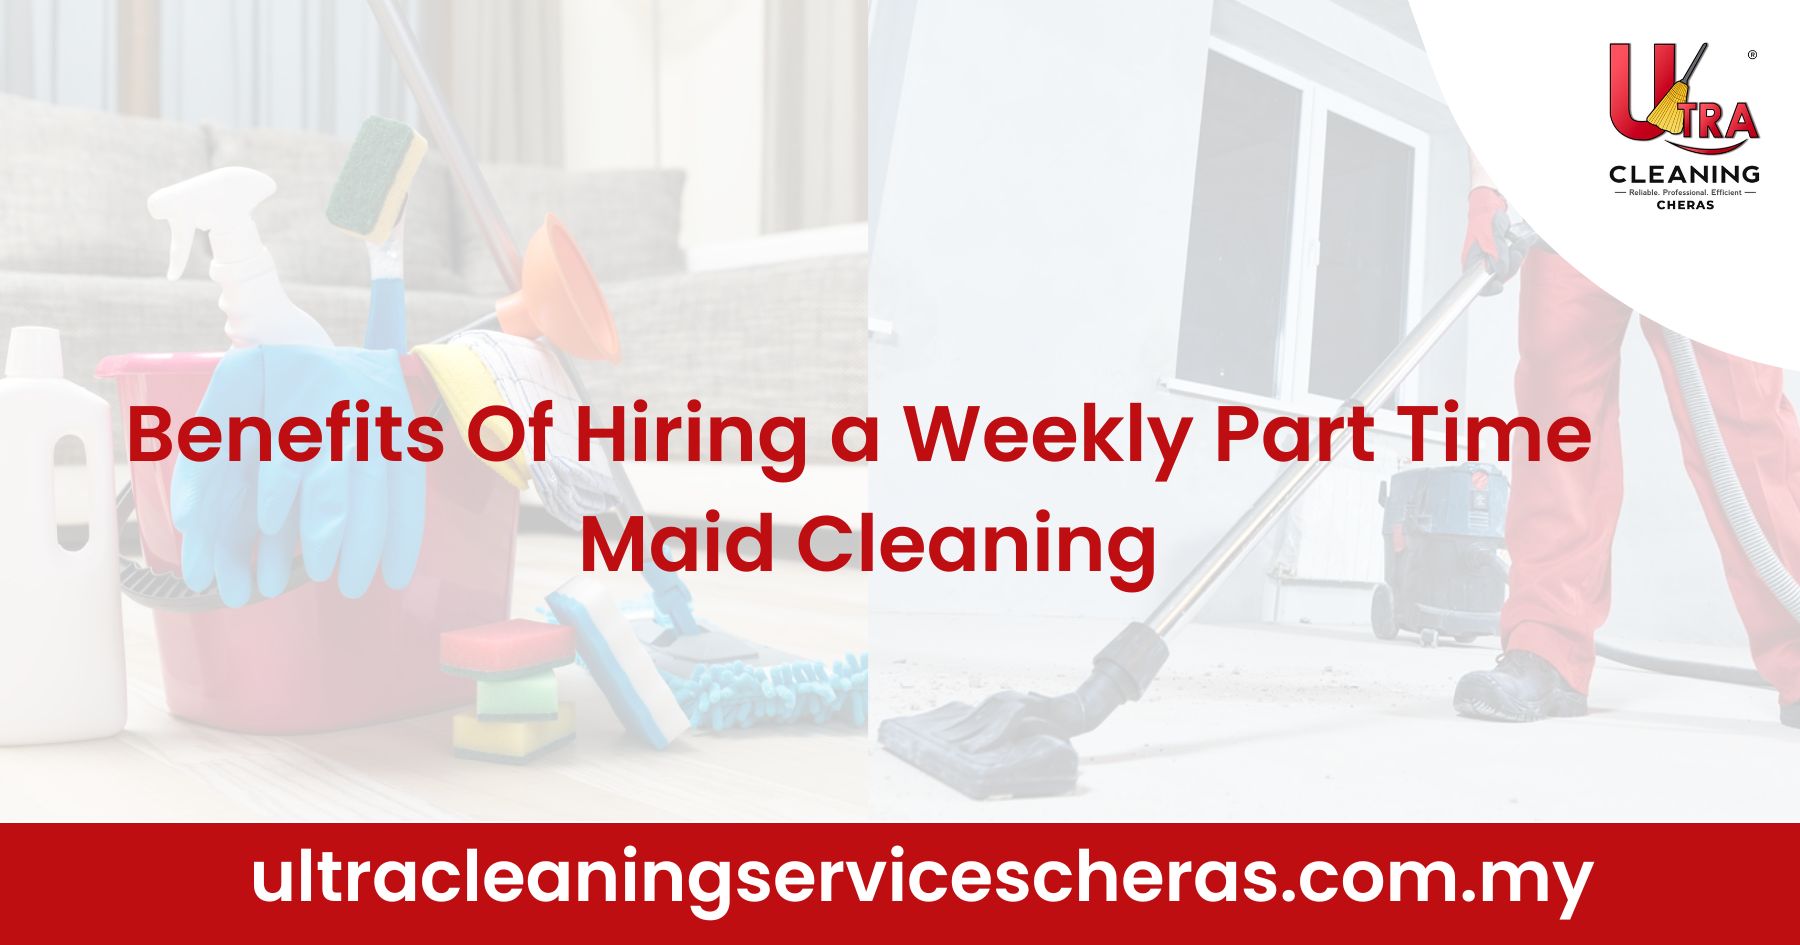 Benefits Of Hiring a Weekly Part Time Maid Cleaning